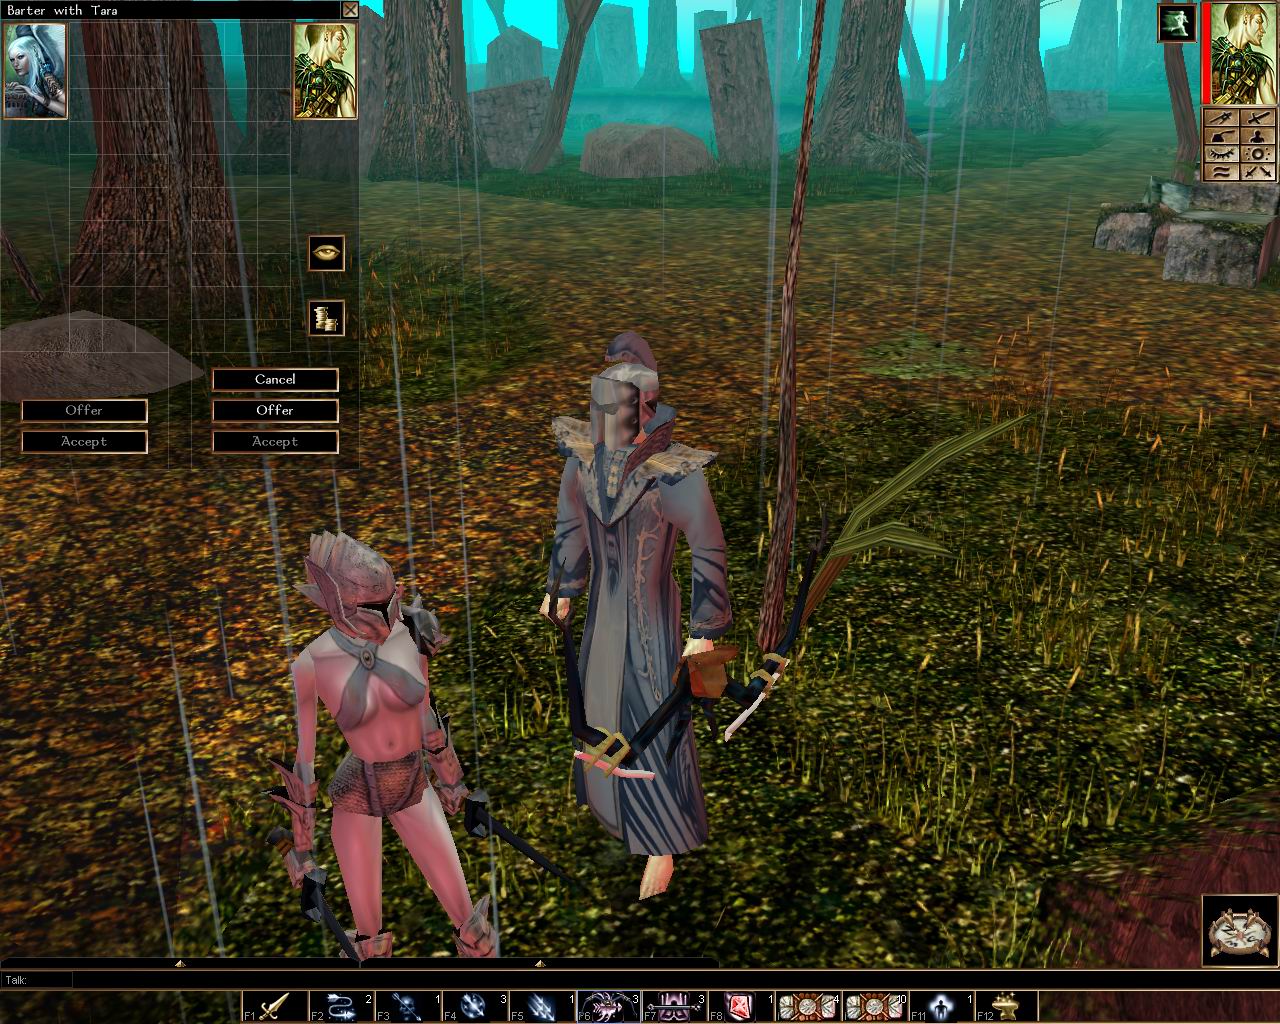 Talk Barter Nwnwiki The Neverwinter Nights Wiki Your Guide To The Game Of Nwn